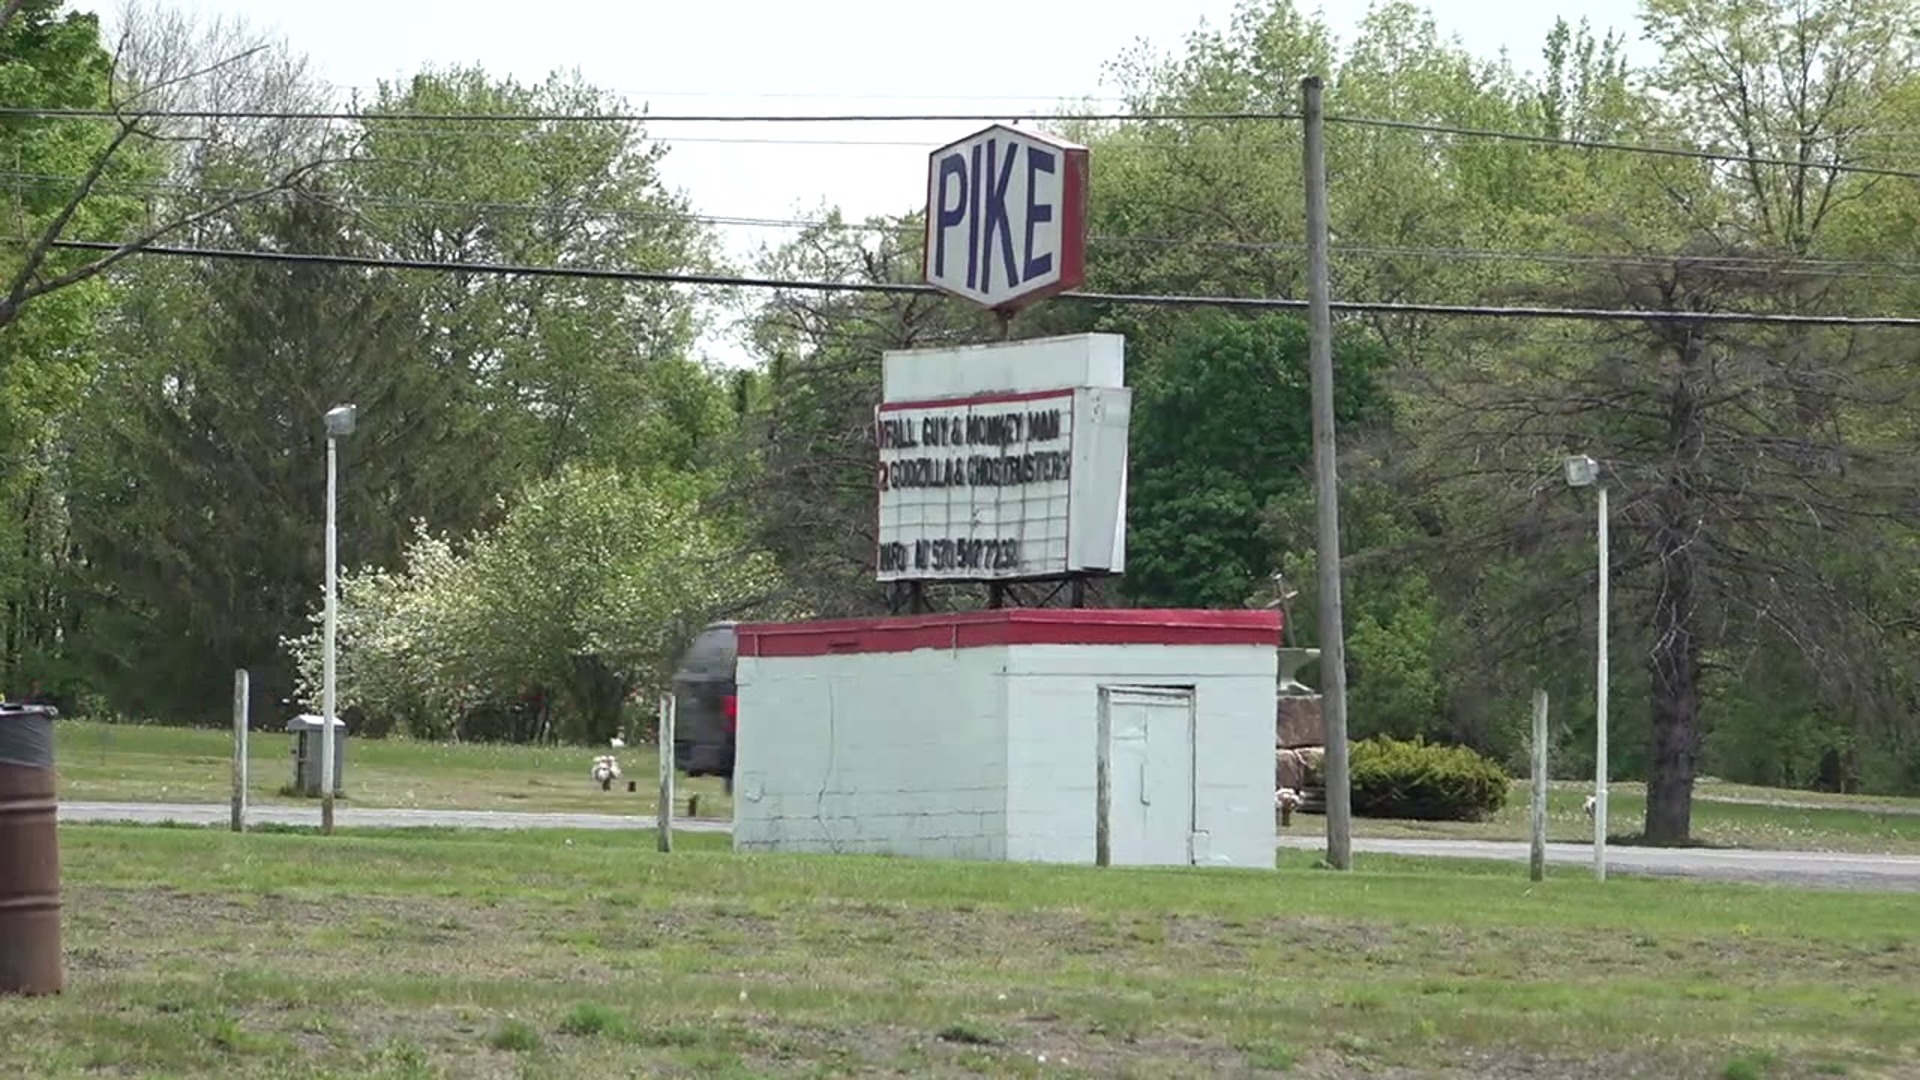 The Pike drive-in has opened in Clinton Township near Montgomery for its 71st year.